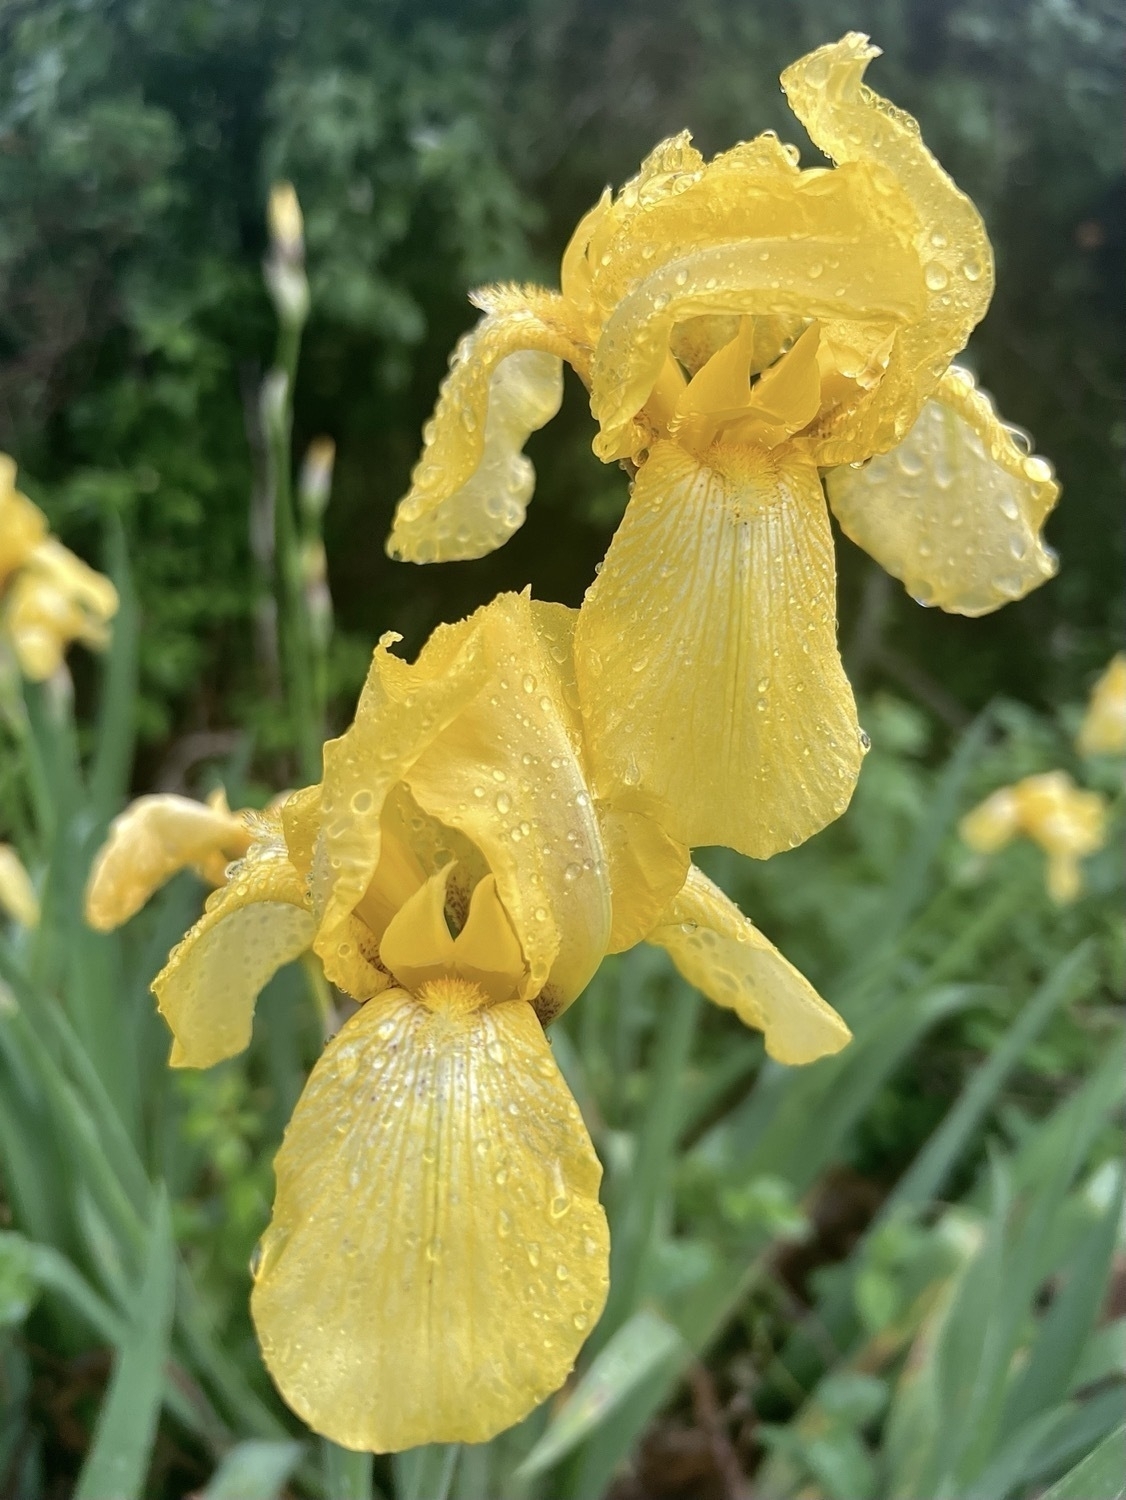 Two yellow iris flowers covered in morning rain drops. They are a nearly solid, bright yellow with barely noticeable darker yellow lines at the center of the lower petals and stretching to the end of those petals